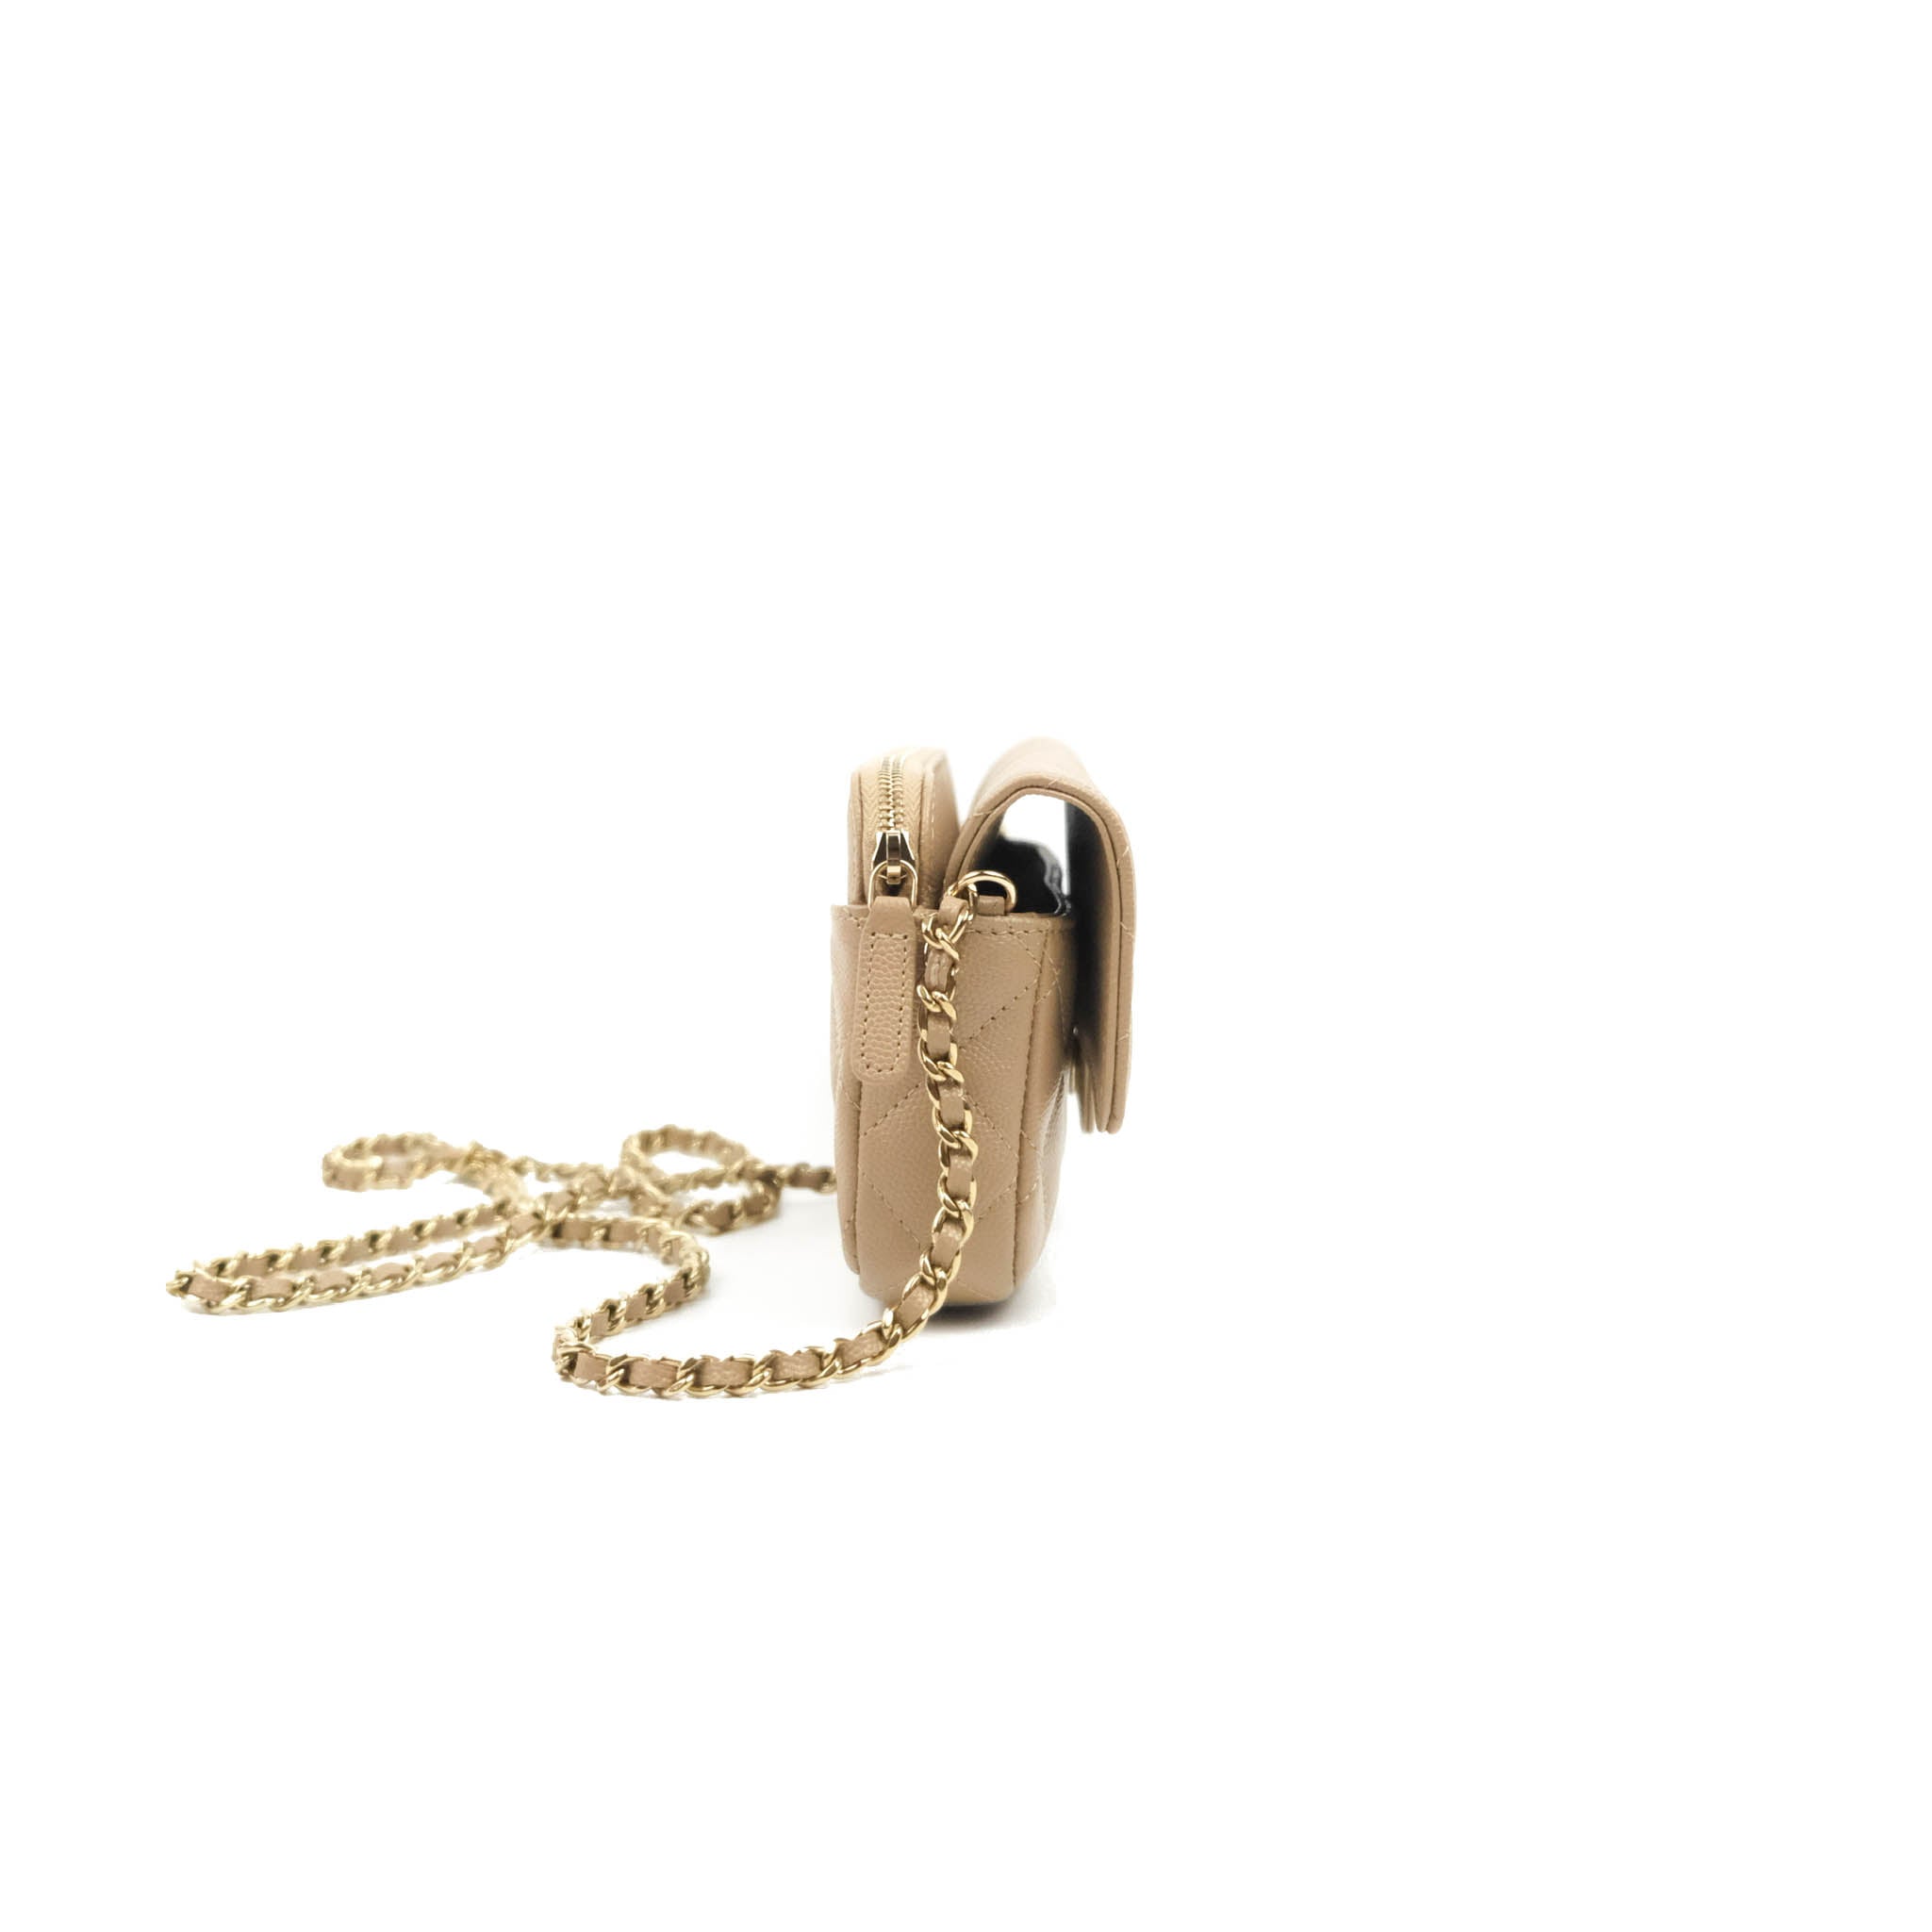 Flap phone holder with chain - Lambskin & gold-tone metal, light brown —  Fashion | CHANEL